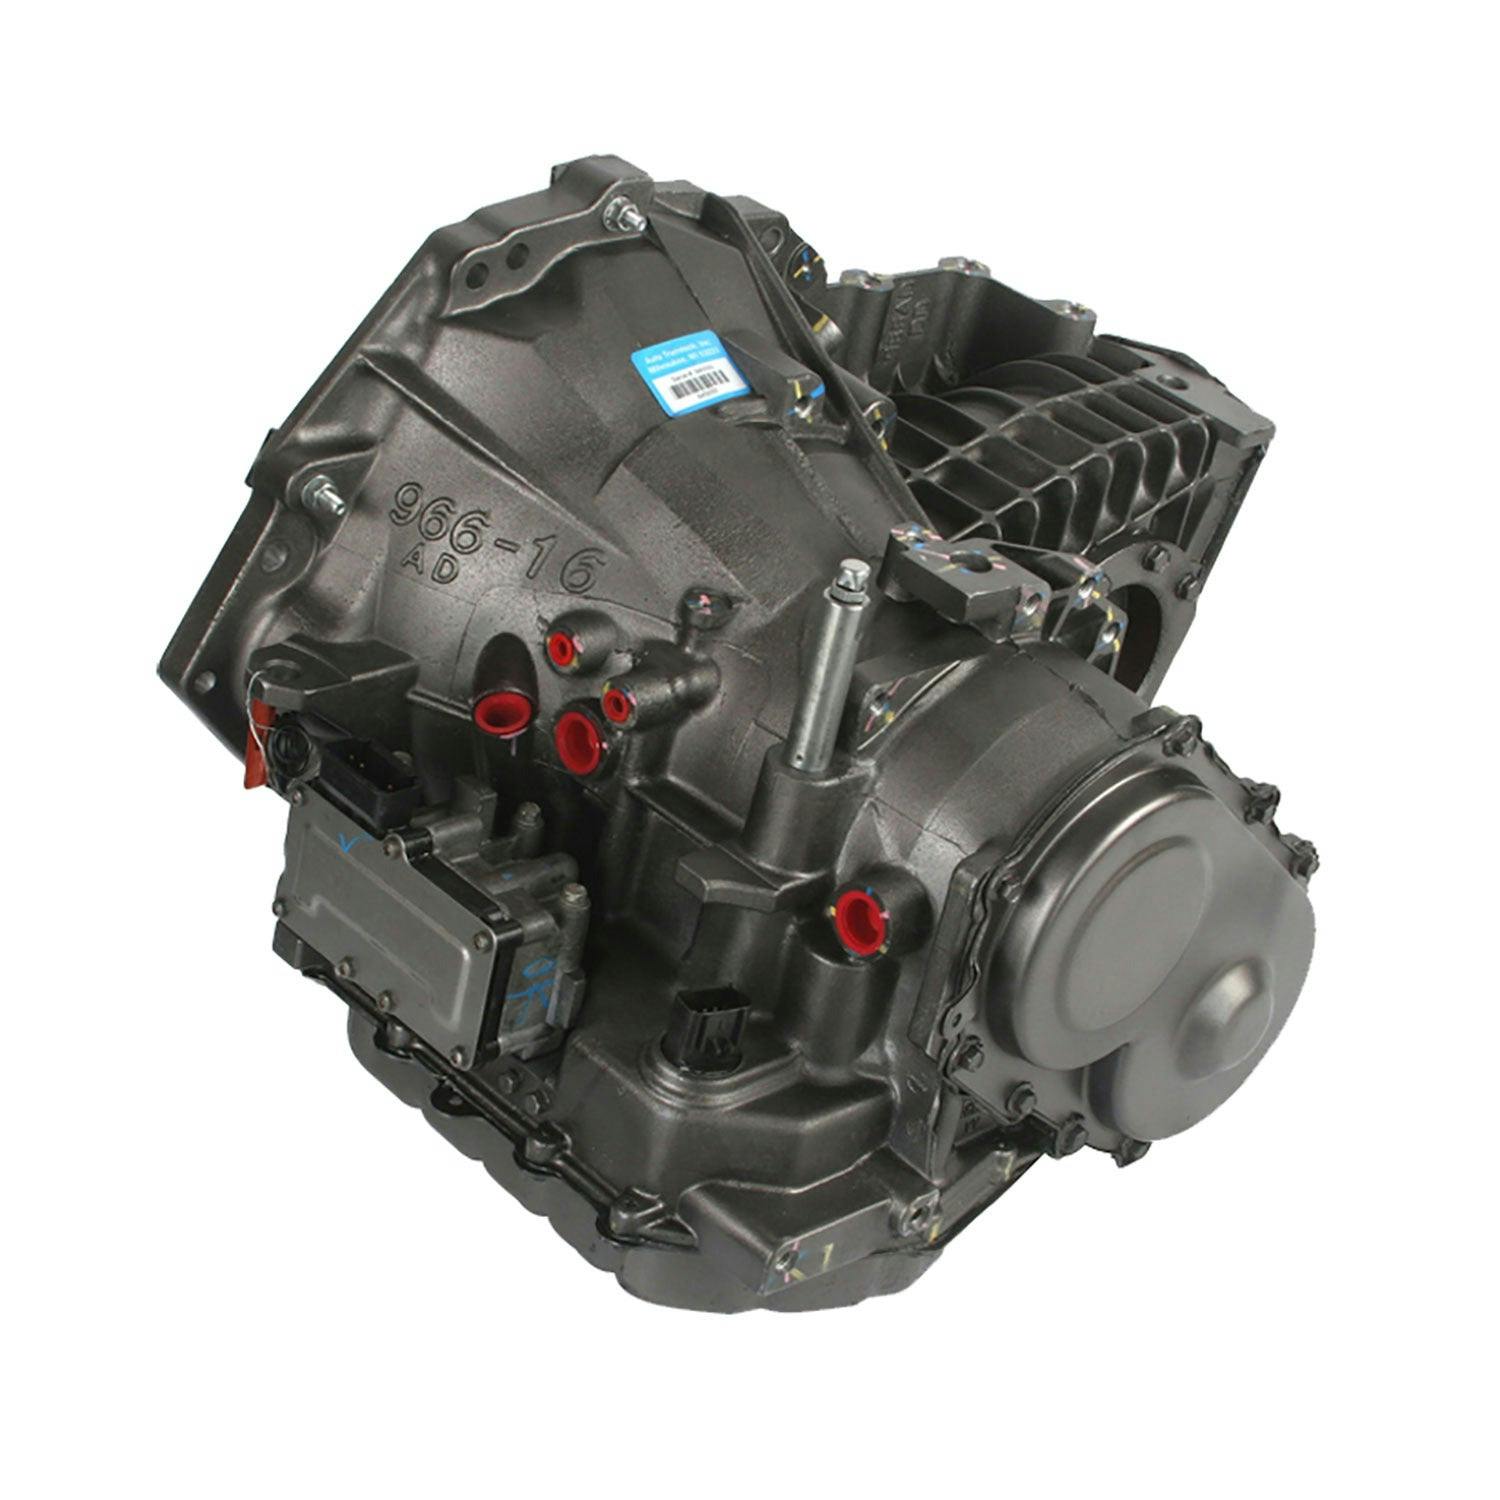 Automatic Transmission for 1996-1999 Chrysler Cirrus/Sebring and Dodge Avenger/Stratus FWD with 2.5L V6 Engine